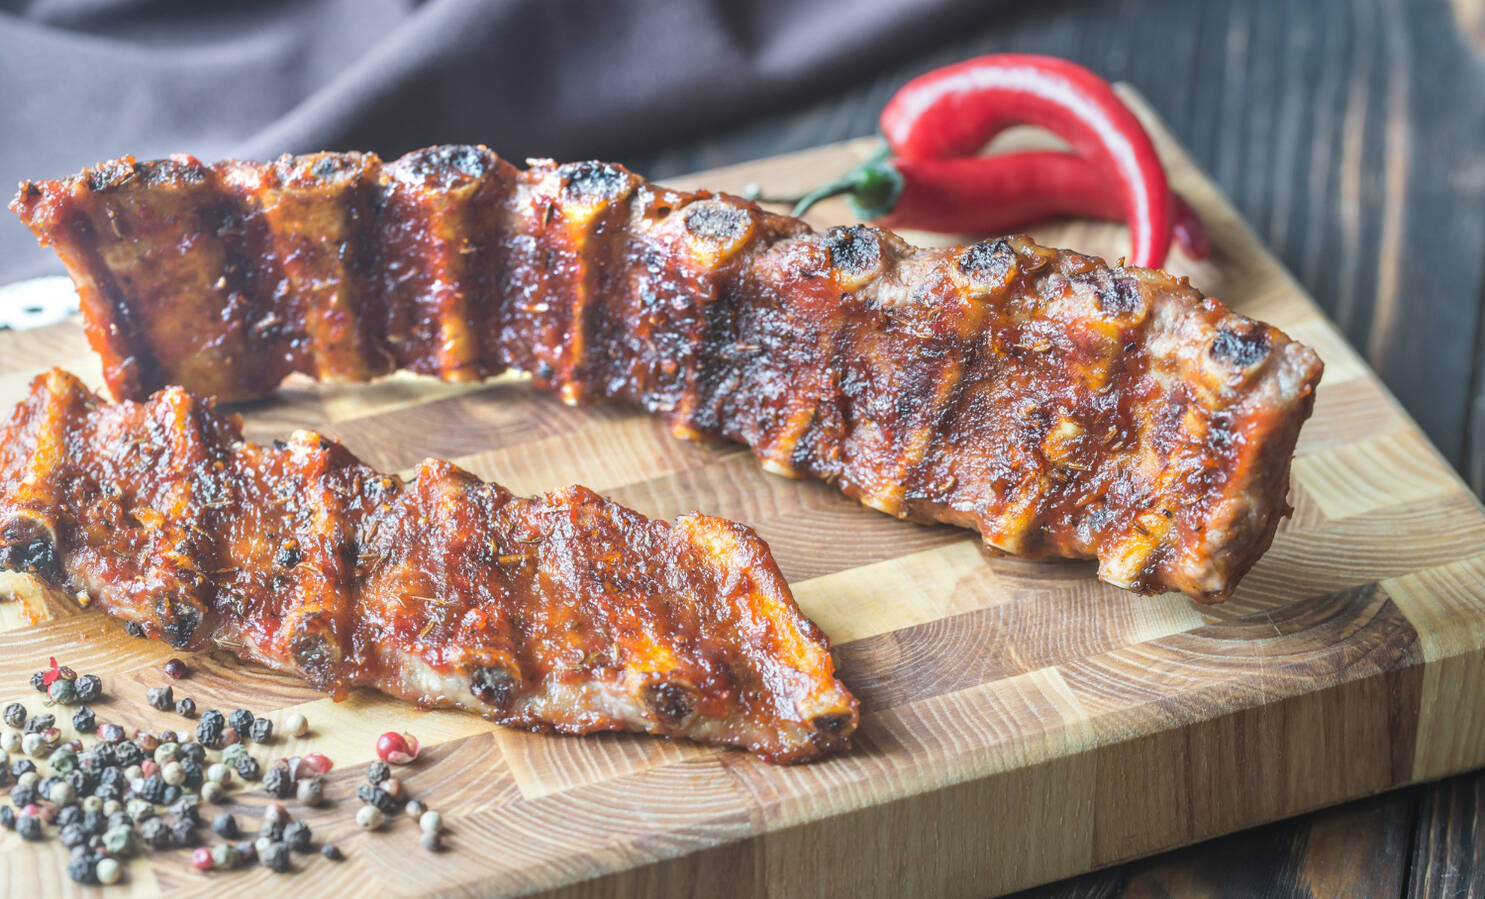 Pork Loin Back Ribs vs. Baby Back Ribs: What's The Difference?